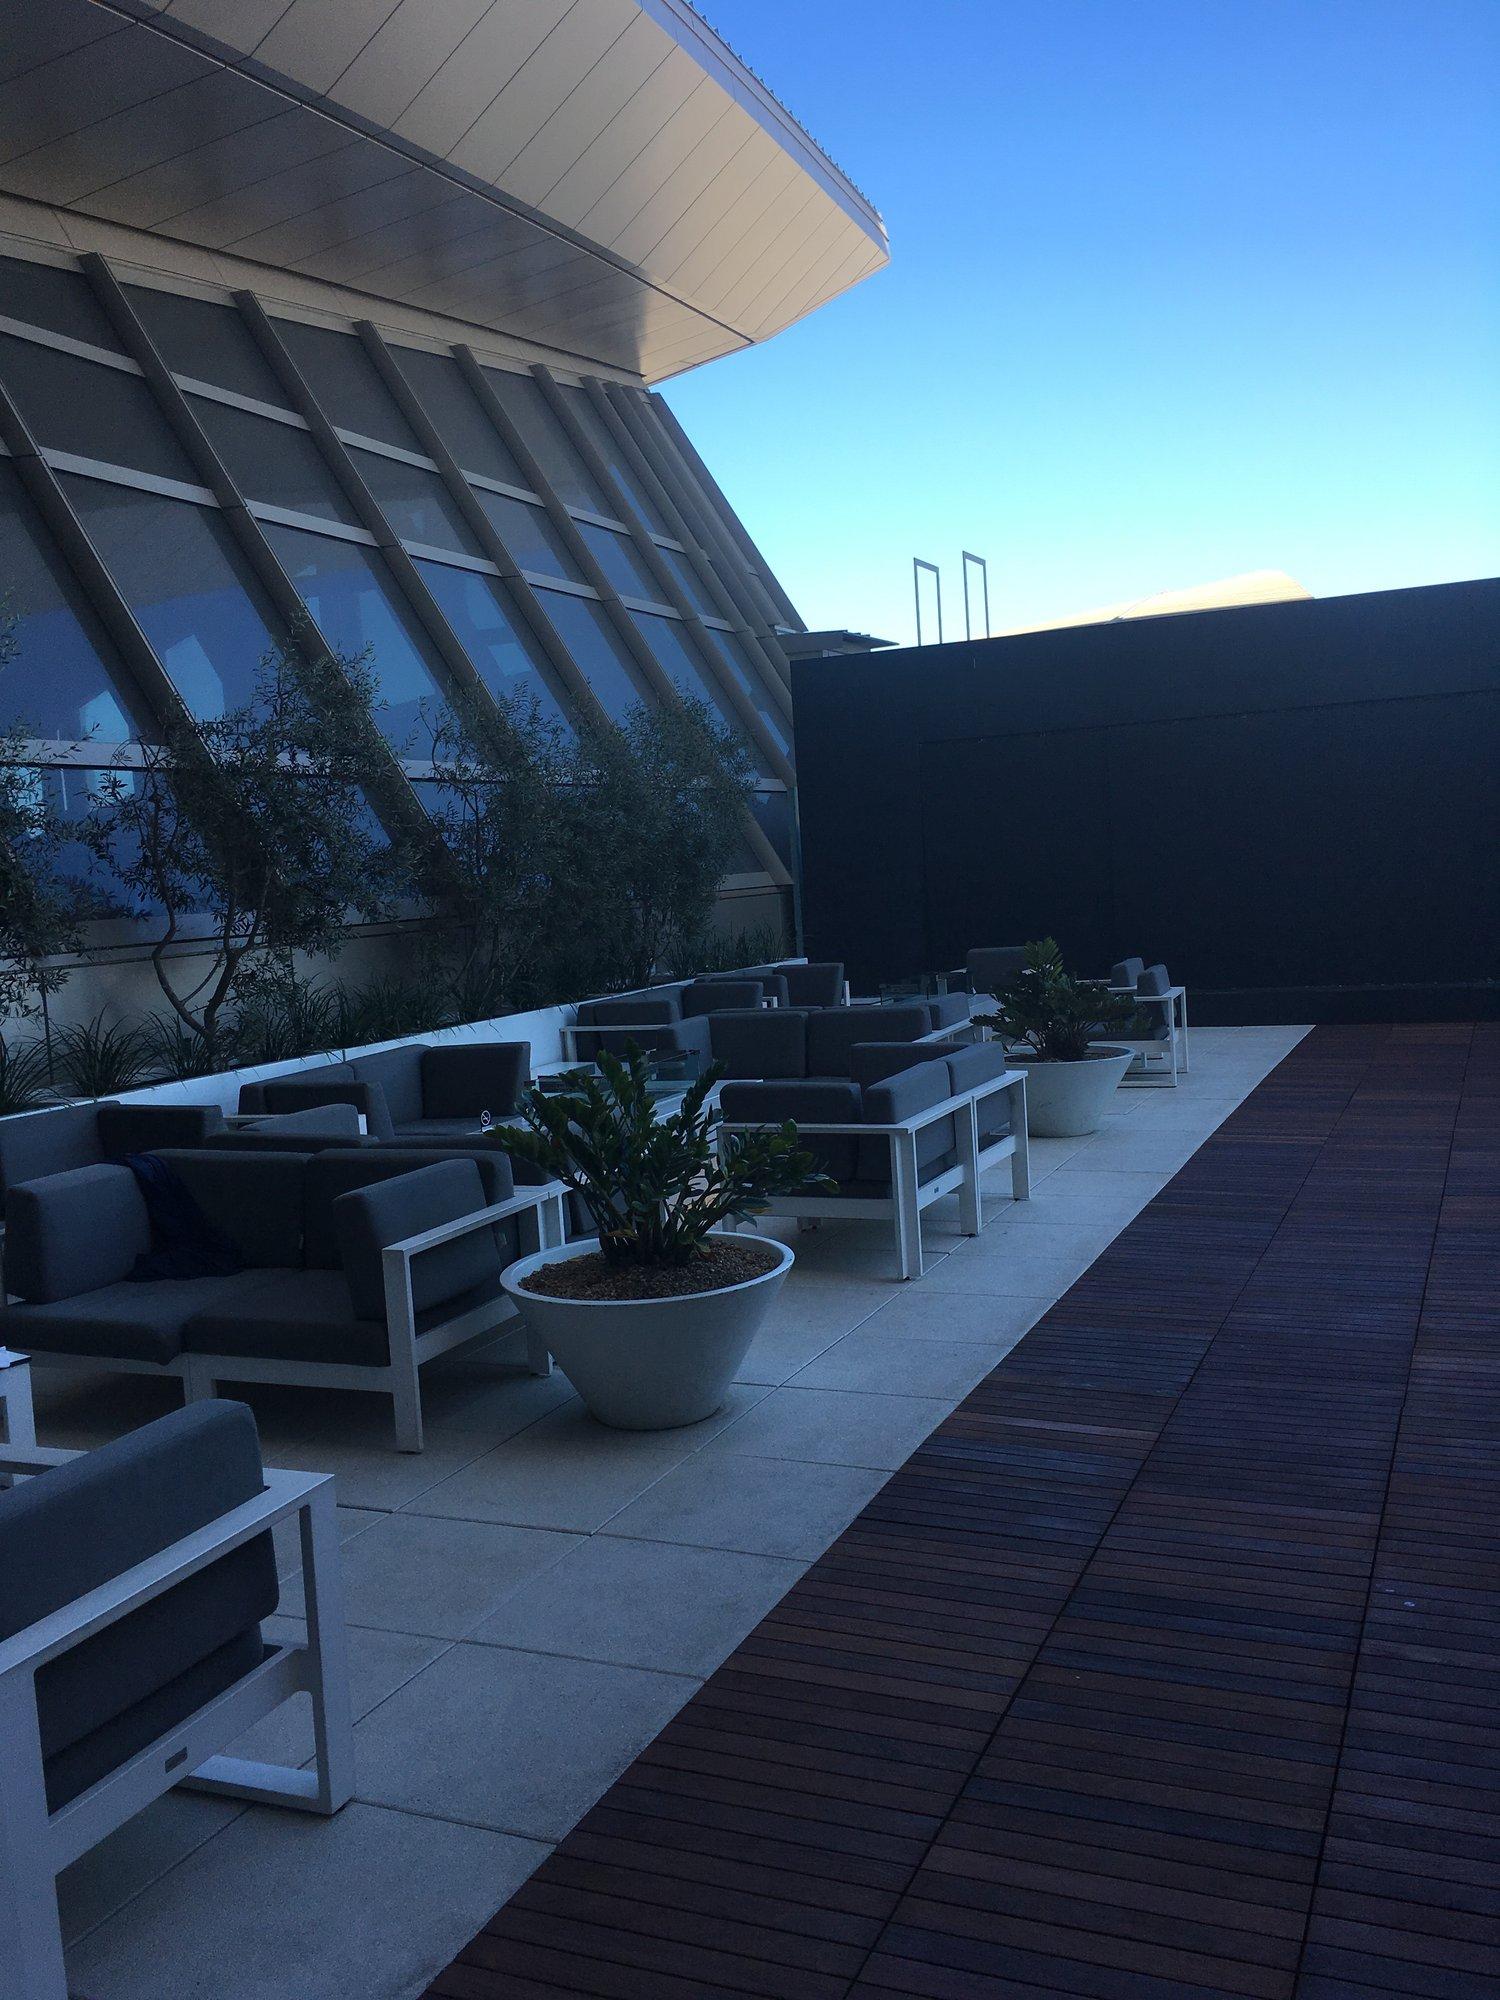 Star Alliance Business Class Lounge image 47 of 72